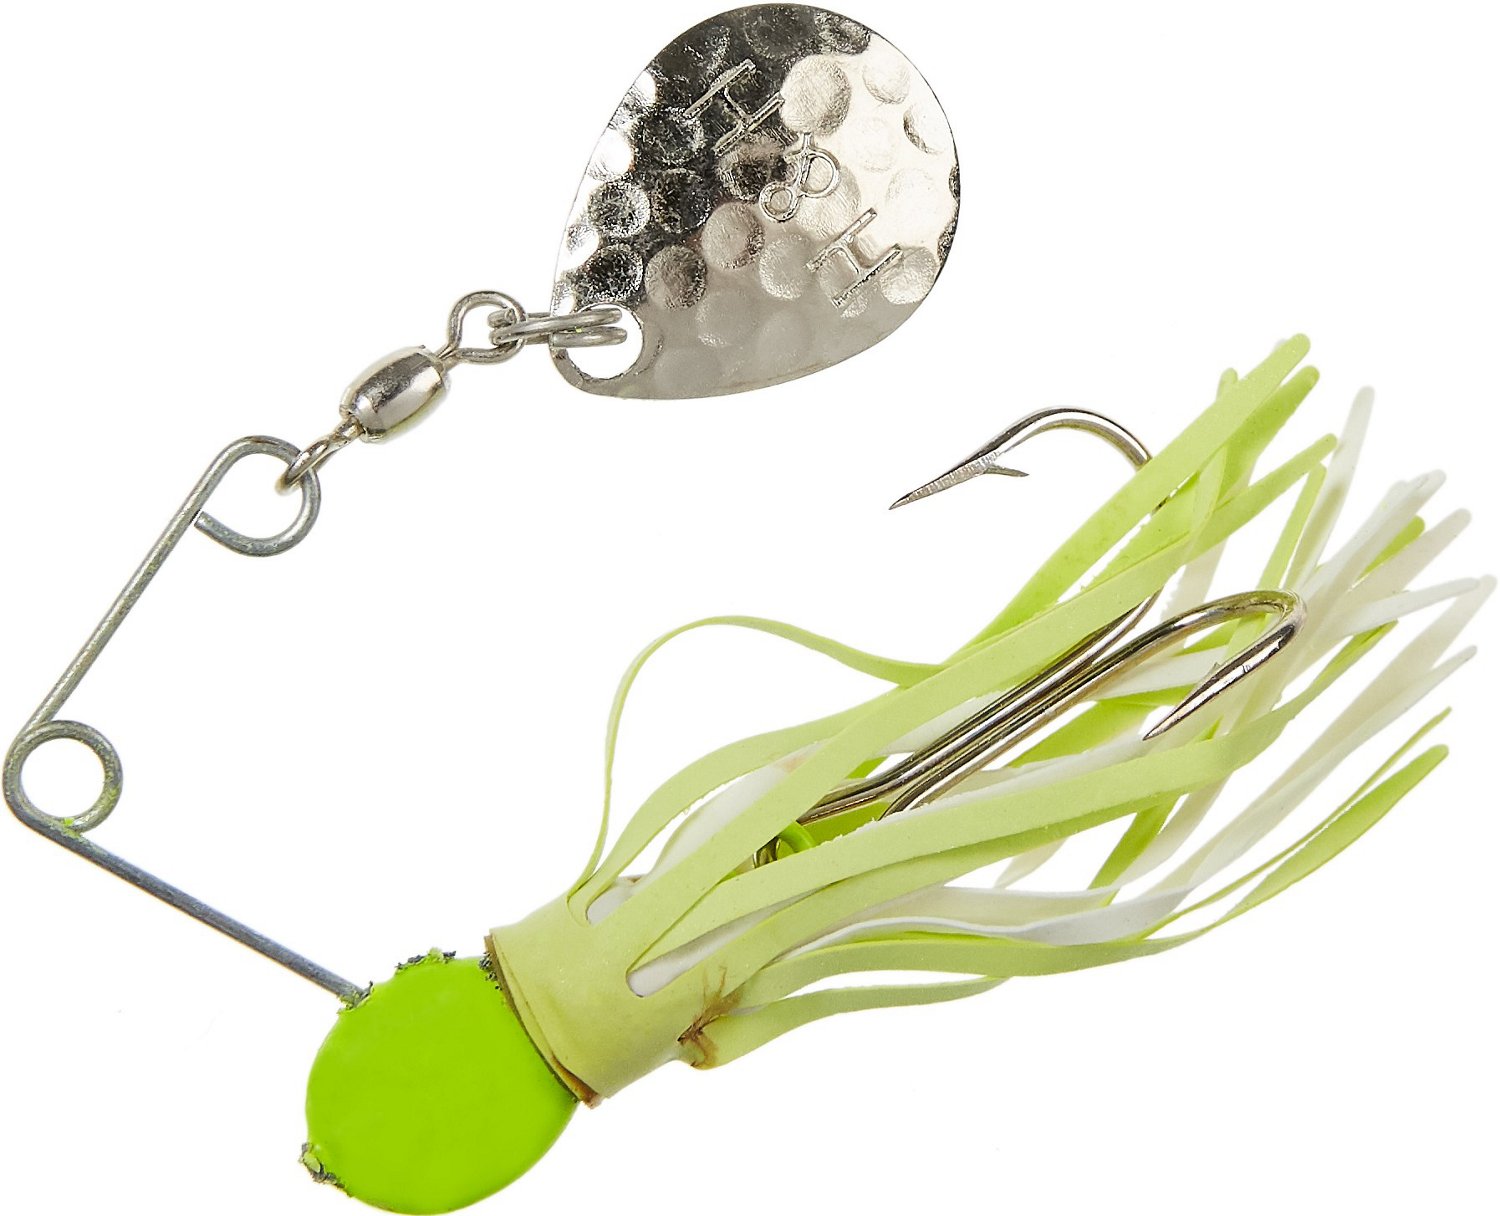 Academy Sports + Outdoors H&H Lure Original Mini Single Spinner